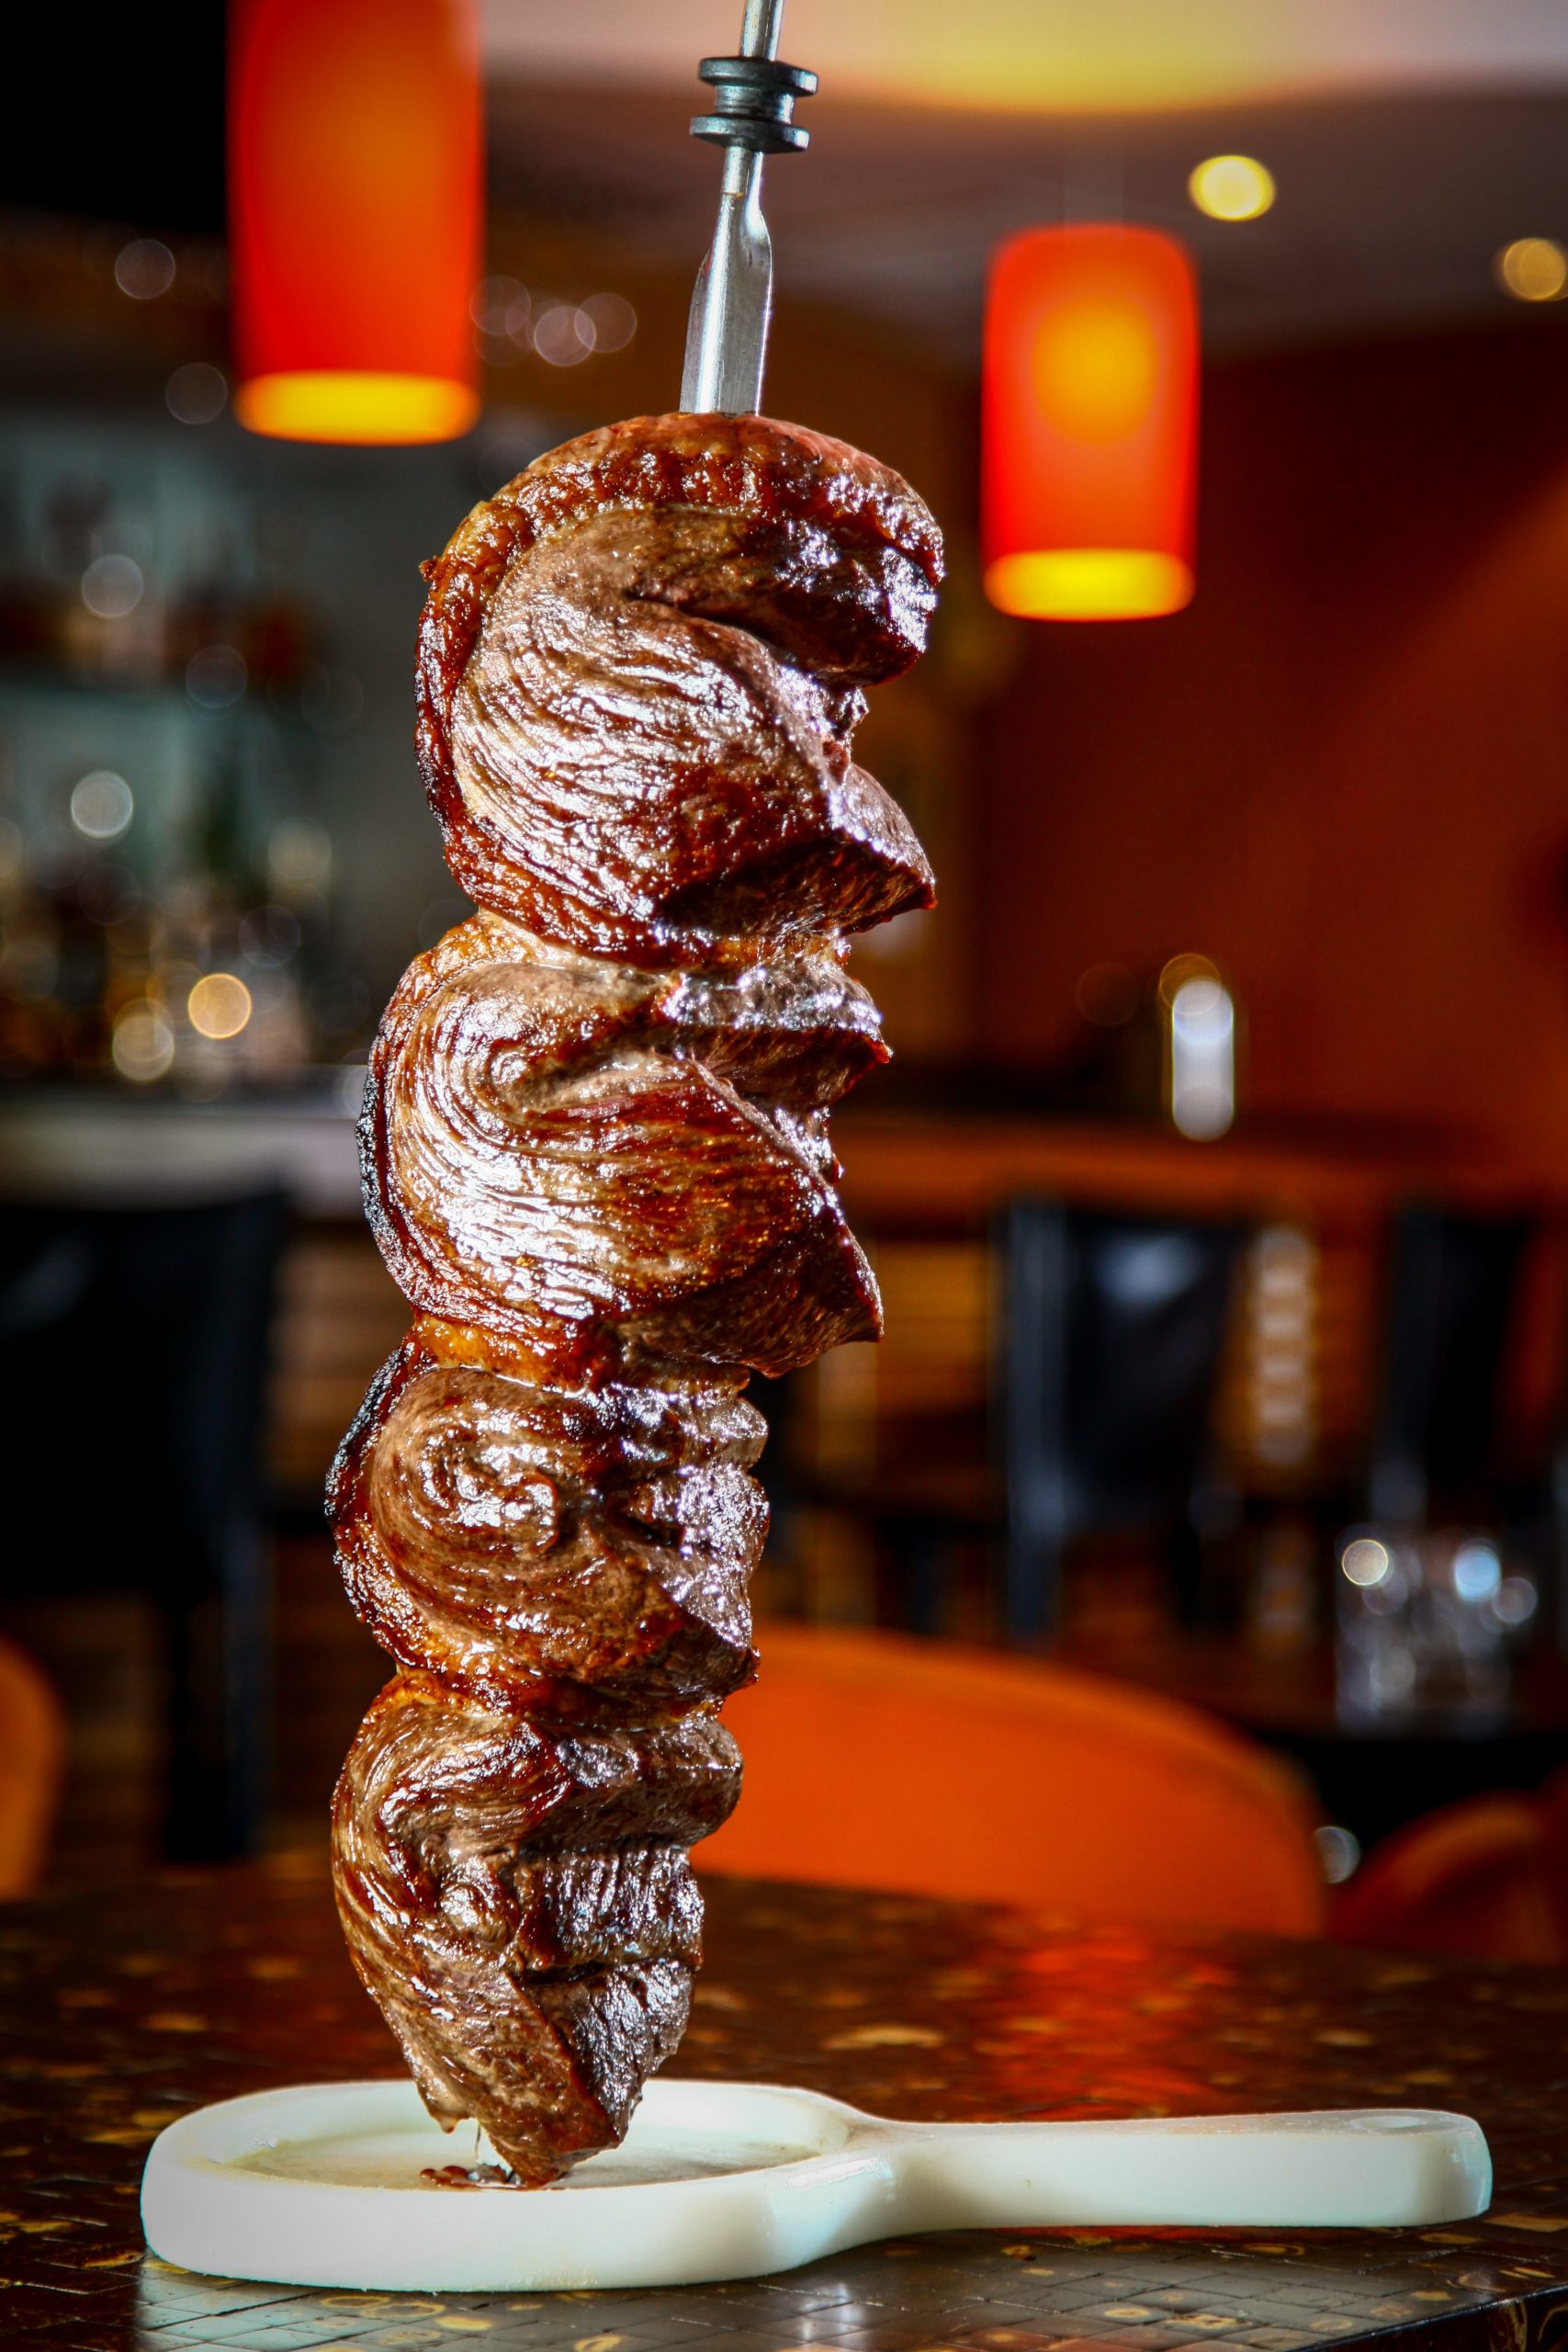 Looking for the Best Steakhouse and Happy Hour in Fort Lauderdale? Visit Chima Steakhouse on Las Olas Blvd!